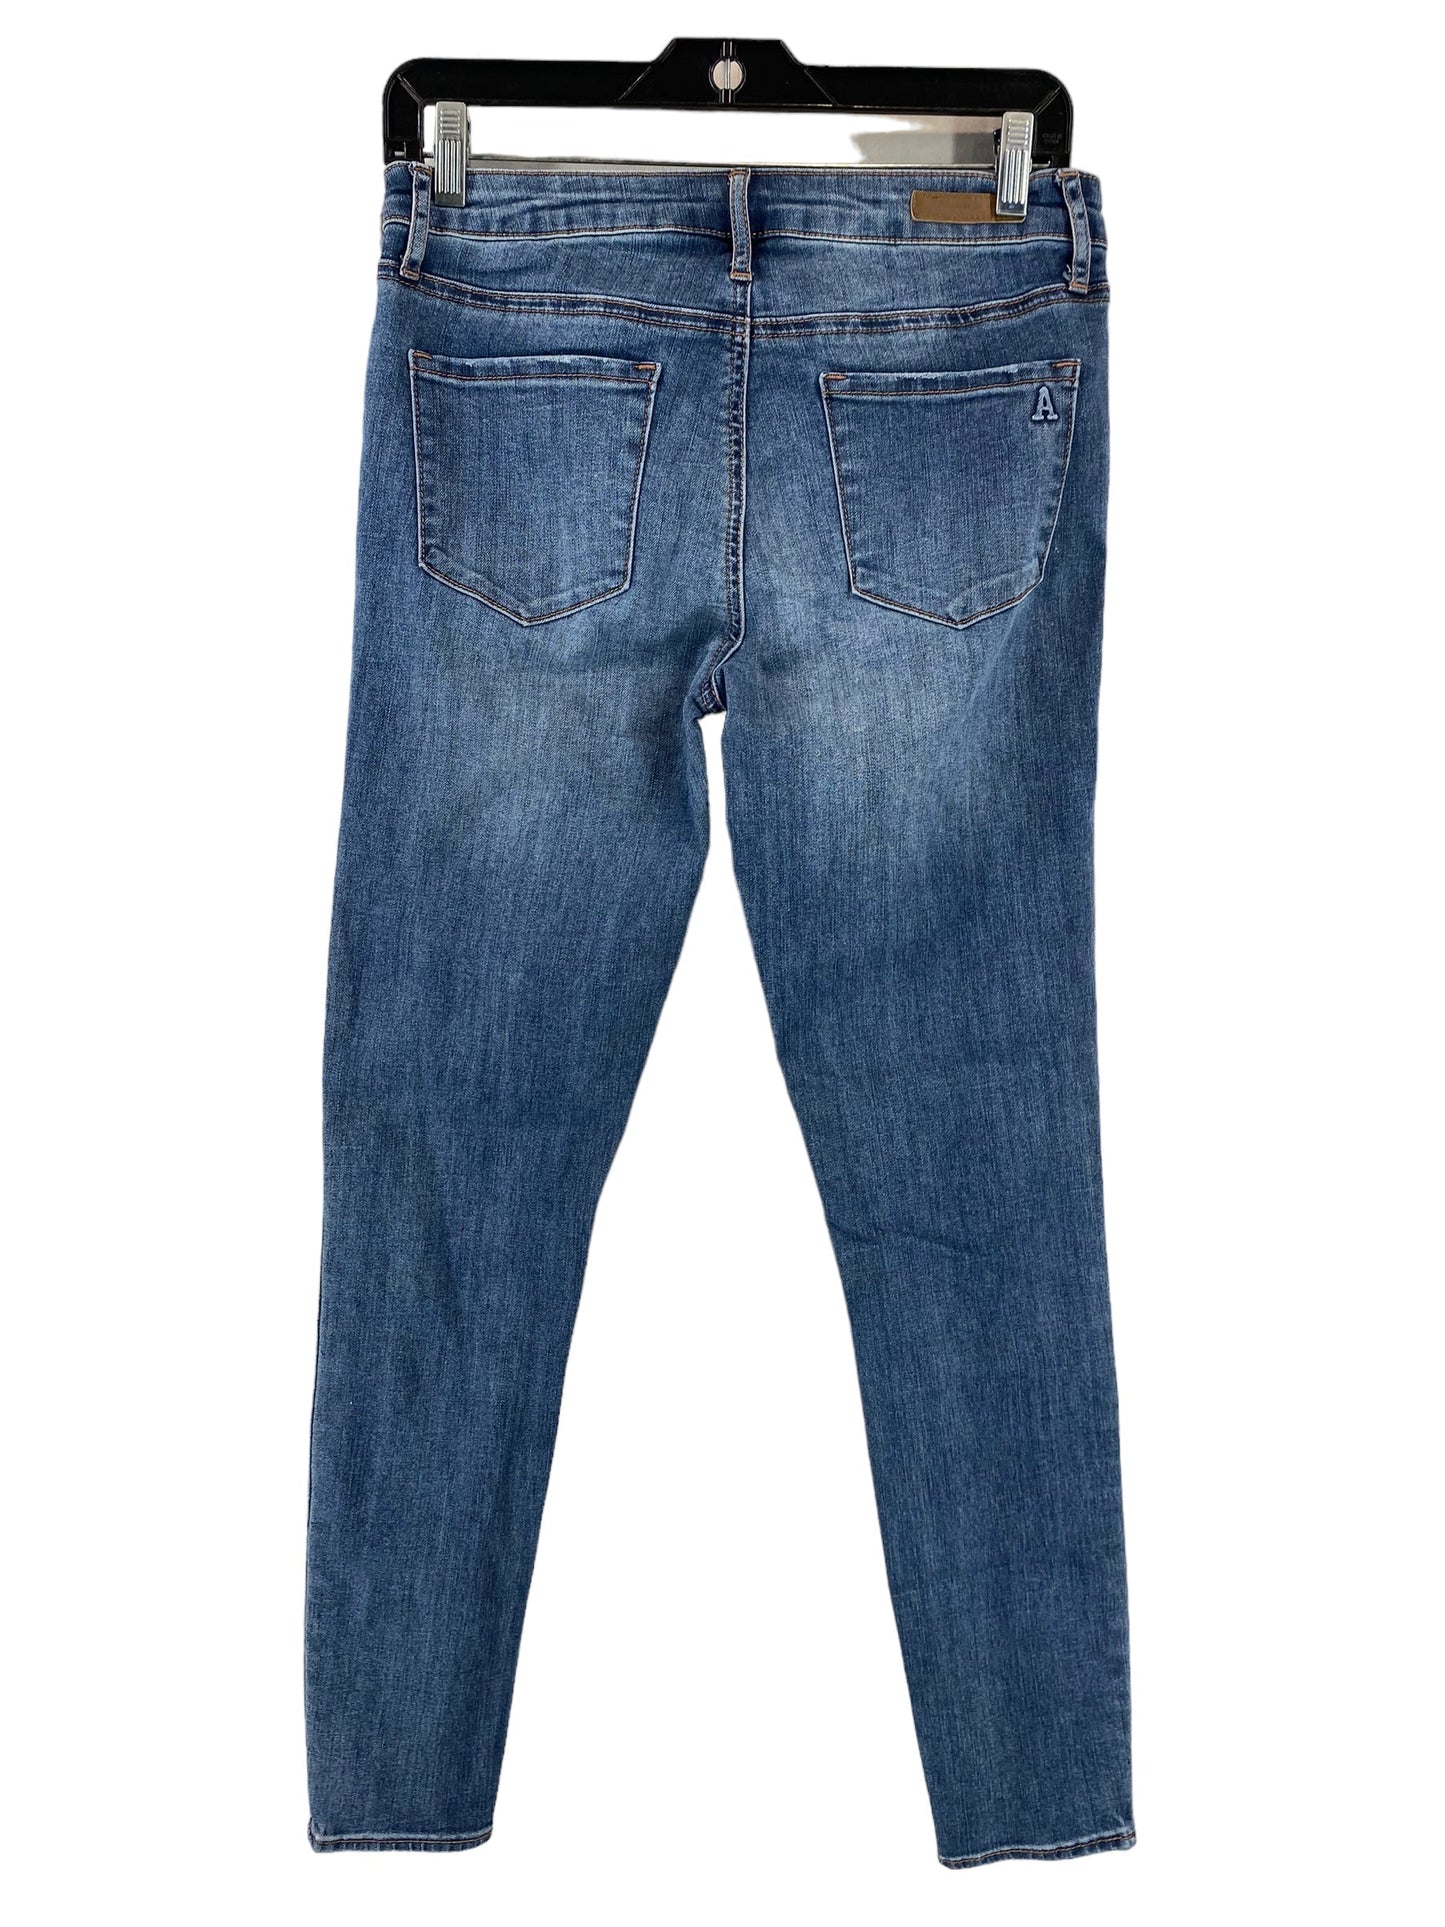 Jeans Skinny By Articles Of Society  Size: 27